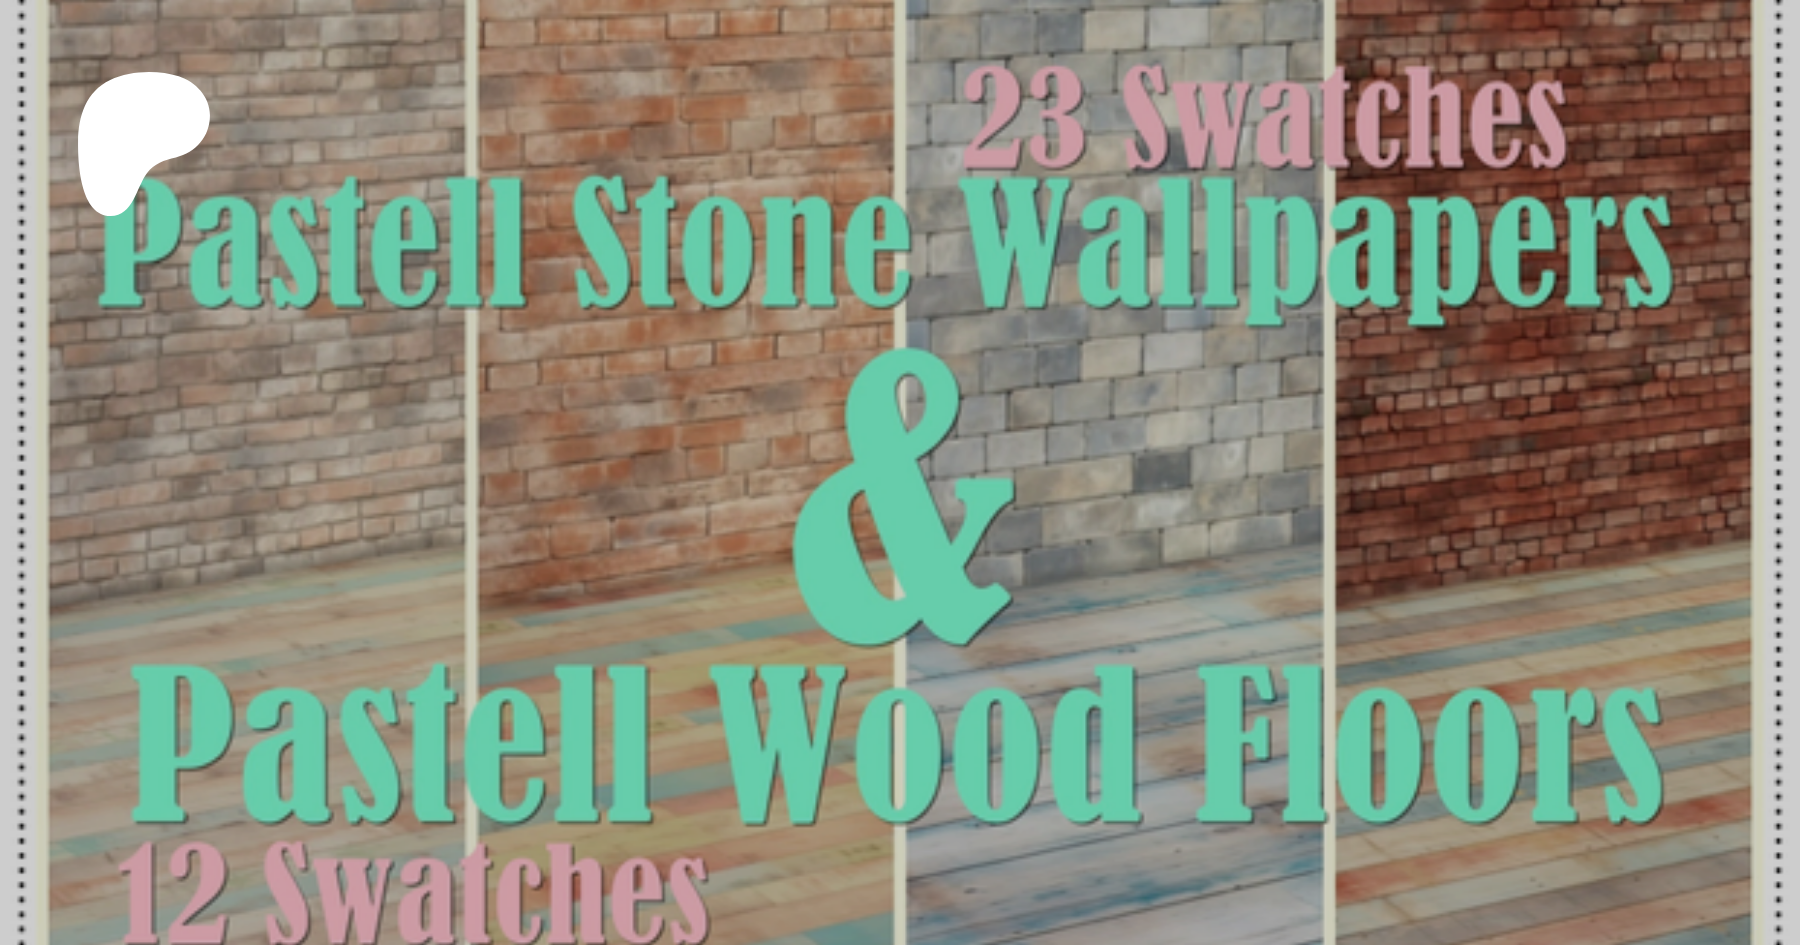 Pastell Wood Floors & Pastell Stone Wallpapers